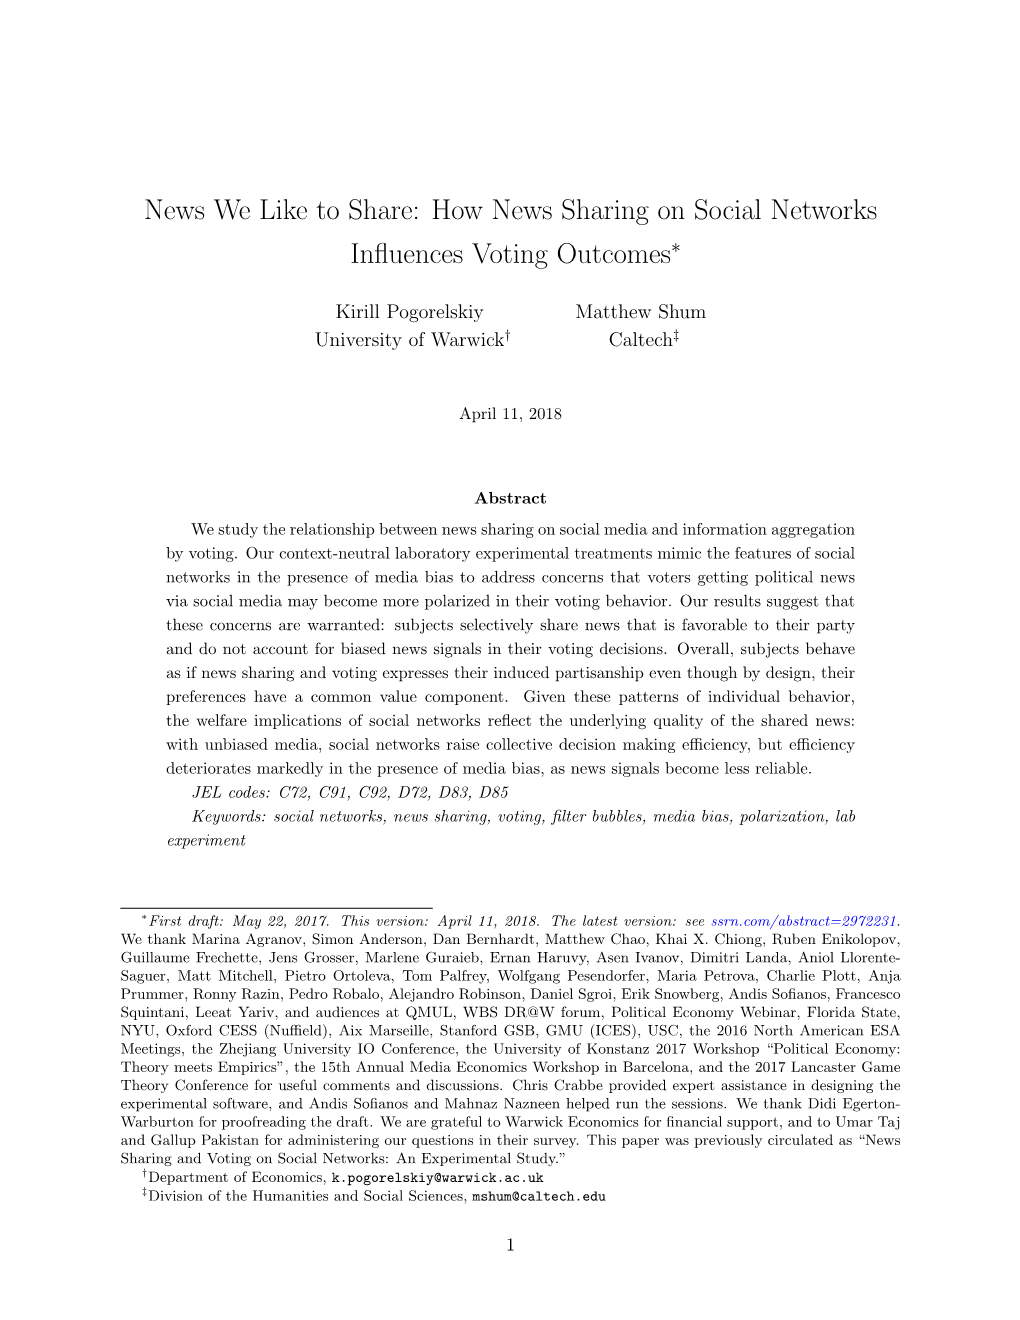 News We Like to Share: How News Sharing on Social Networks Influences Voting Outcomes